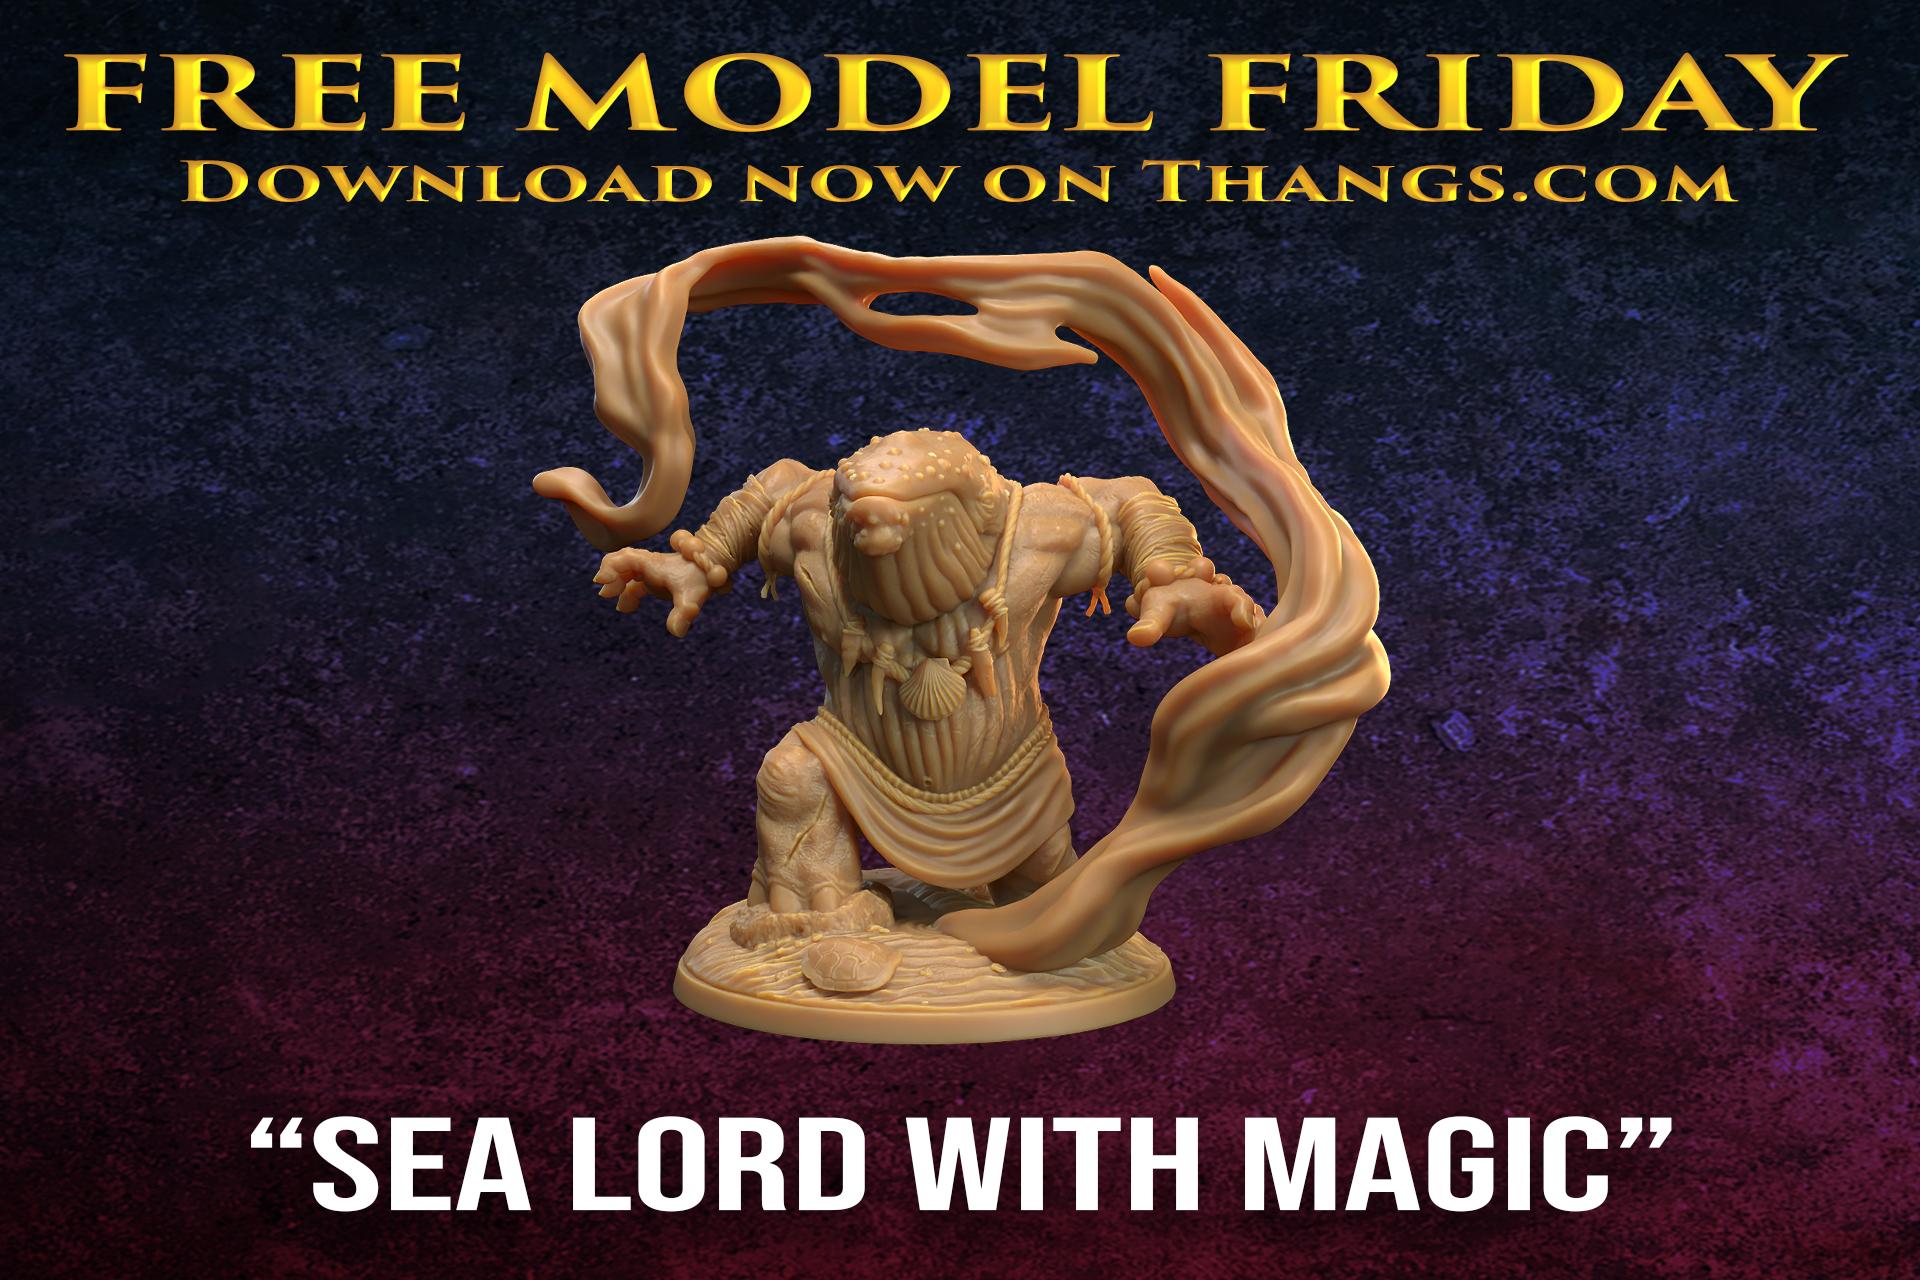 Free Model Friday and March Previews